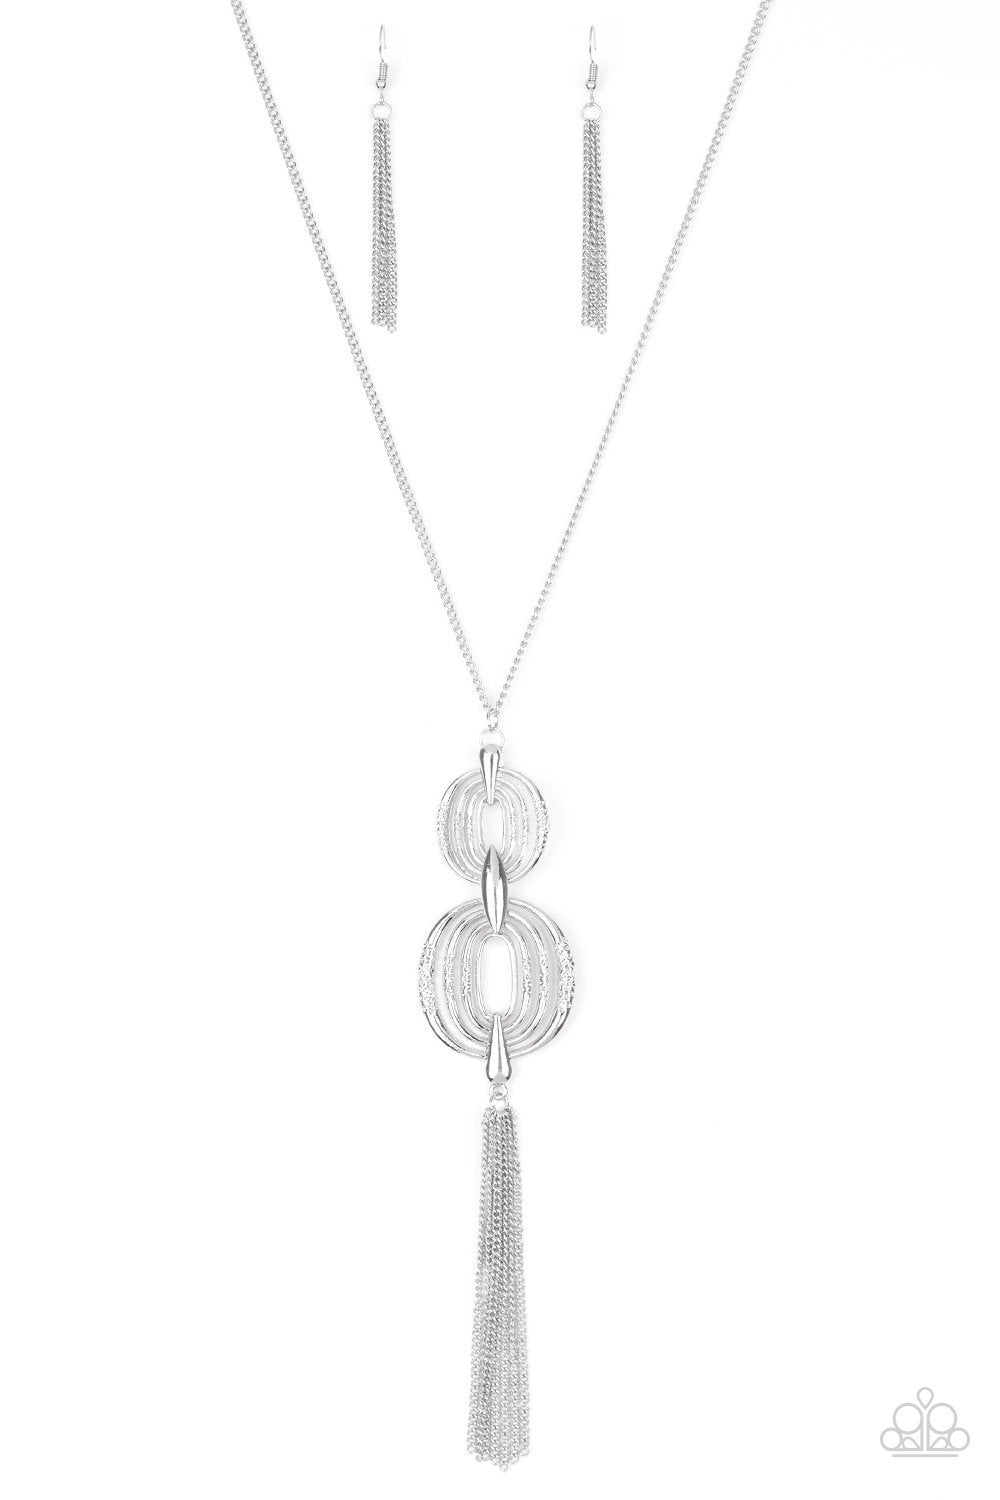 Timelessly Tasseled Silver Pendant Necklace - Paparazzi Accessories-CarasShop.com - $5 Jewelry by Cara Jewels